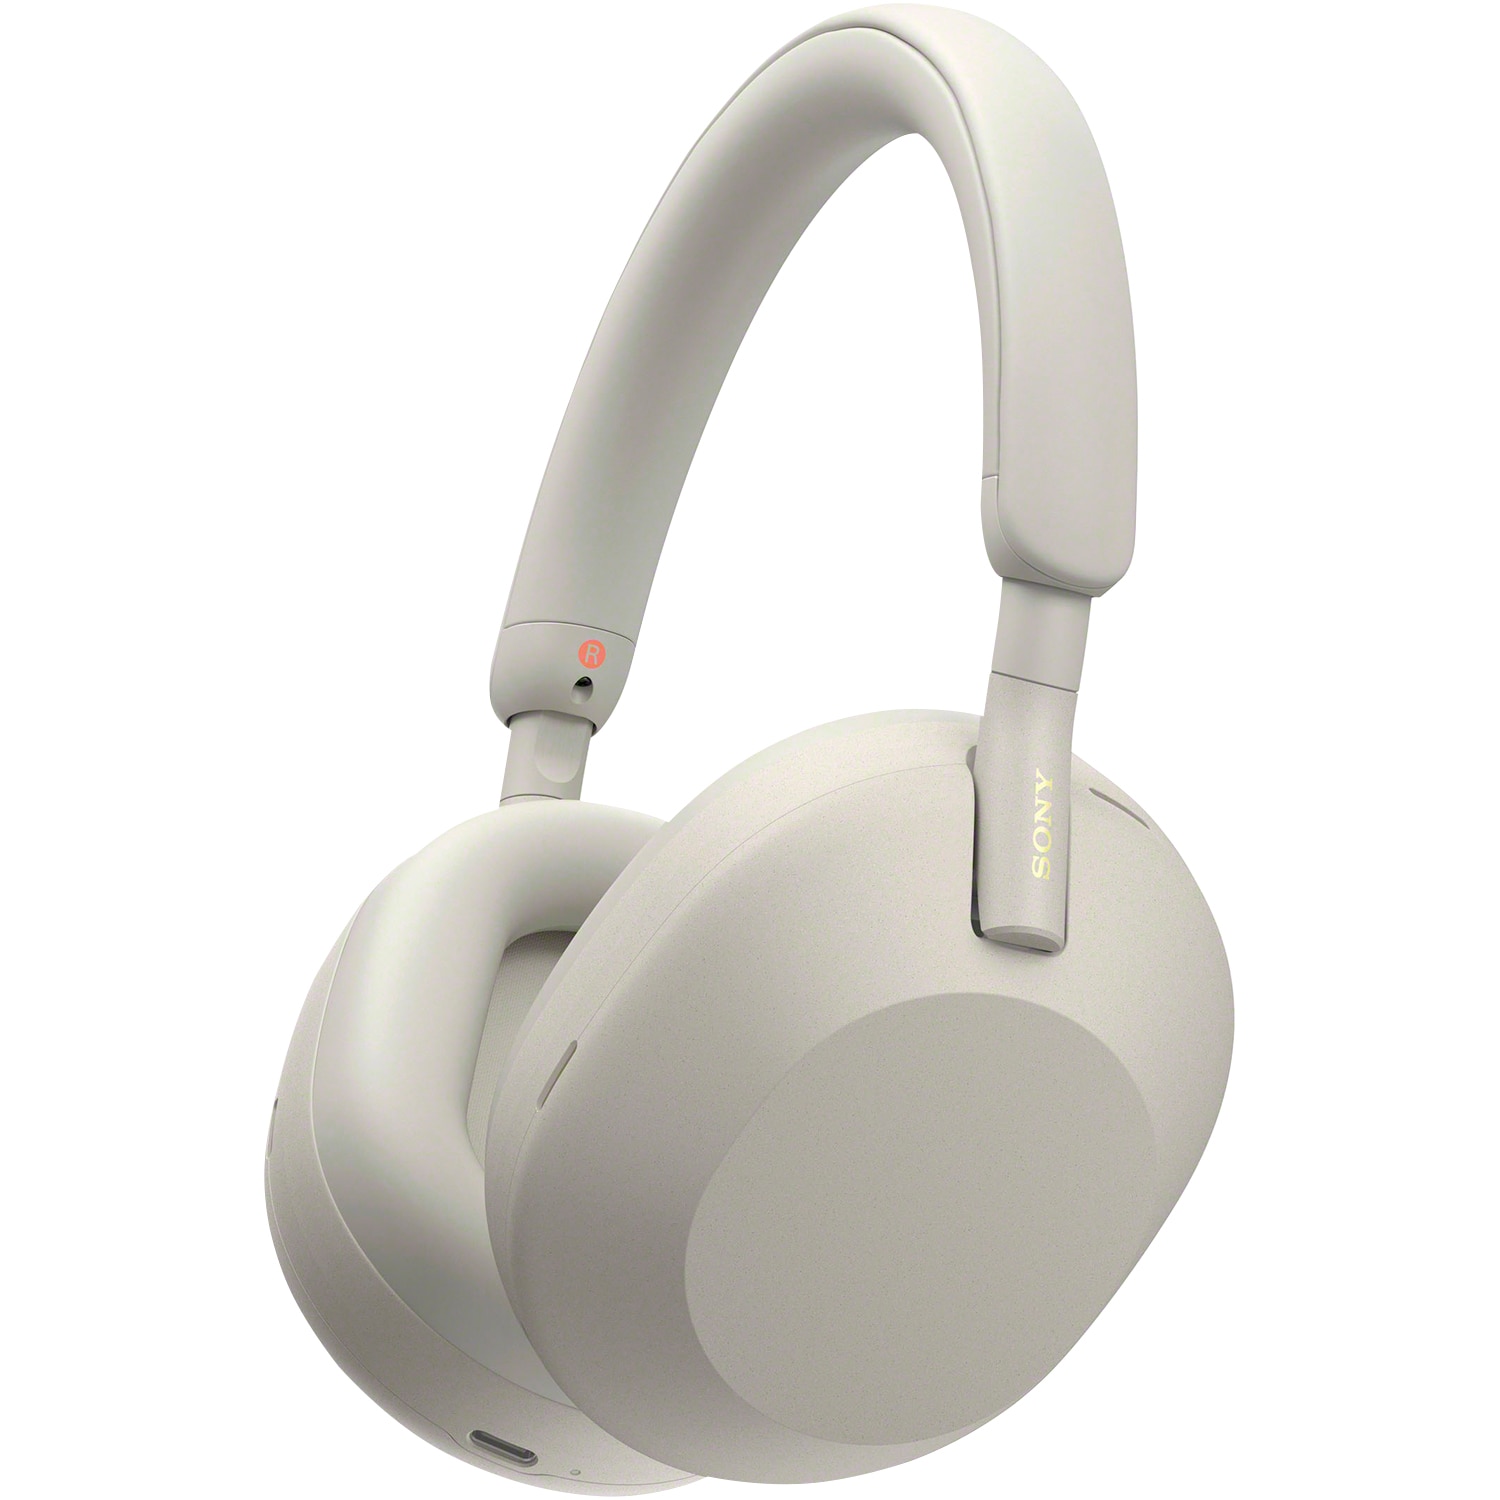 Sony Wireless Noise Cancelling Headphones, Silver